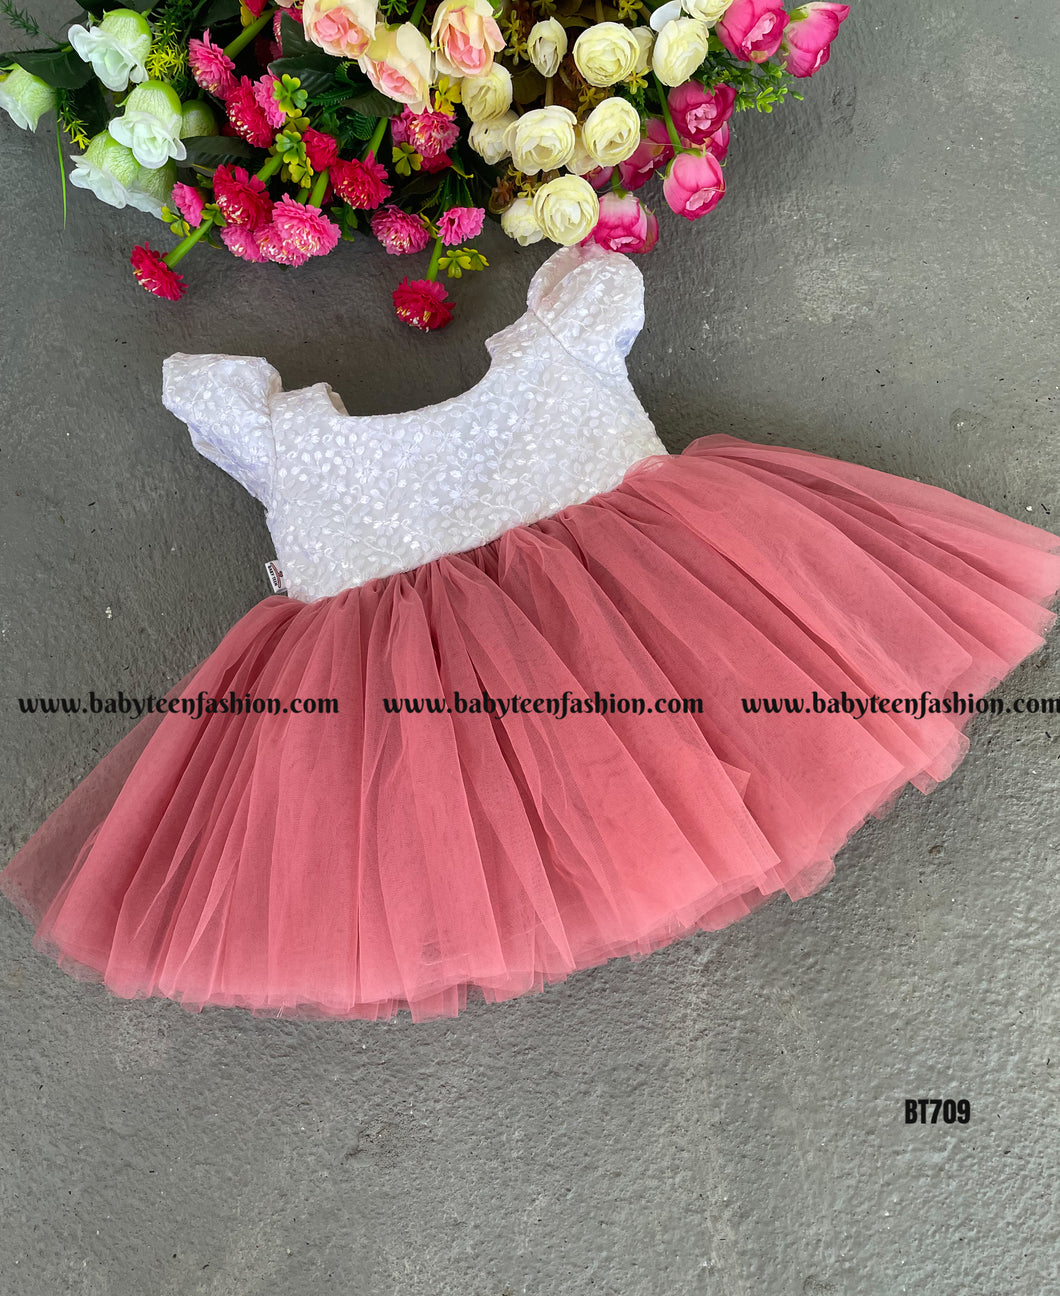 BT709 Coral Blossom Party Gown – Your Little One's Dreamy Delight